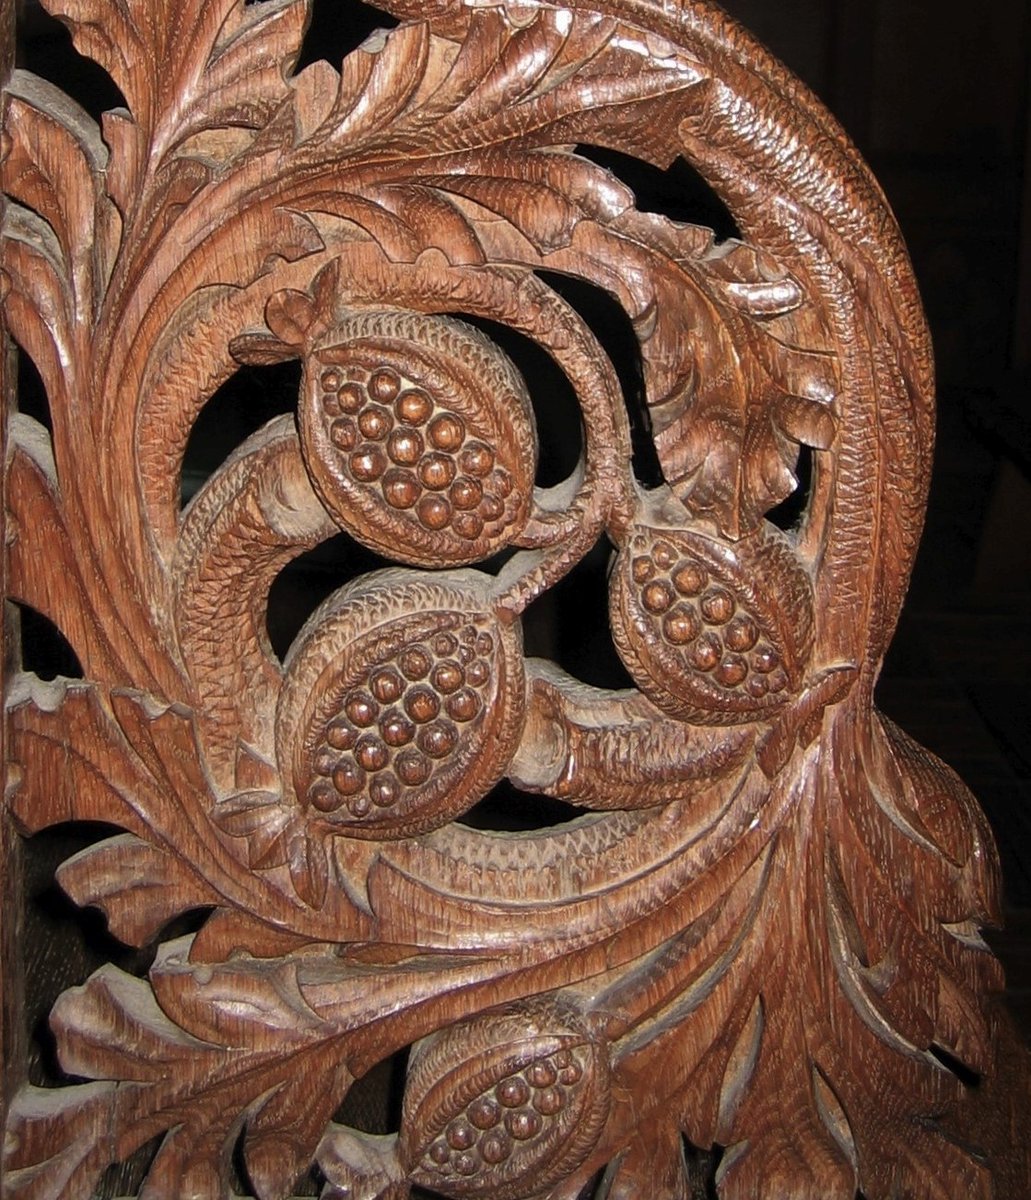 Ermington #Devon Pomegranate detail on choir stall bench end carved late 1880s by Trask & Co of Norton sub Hamdon, Somerset, during the restoration there to designs by John Dando Sedding. 📸: my own #WoodcarvingWednesday